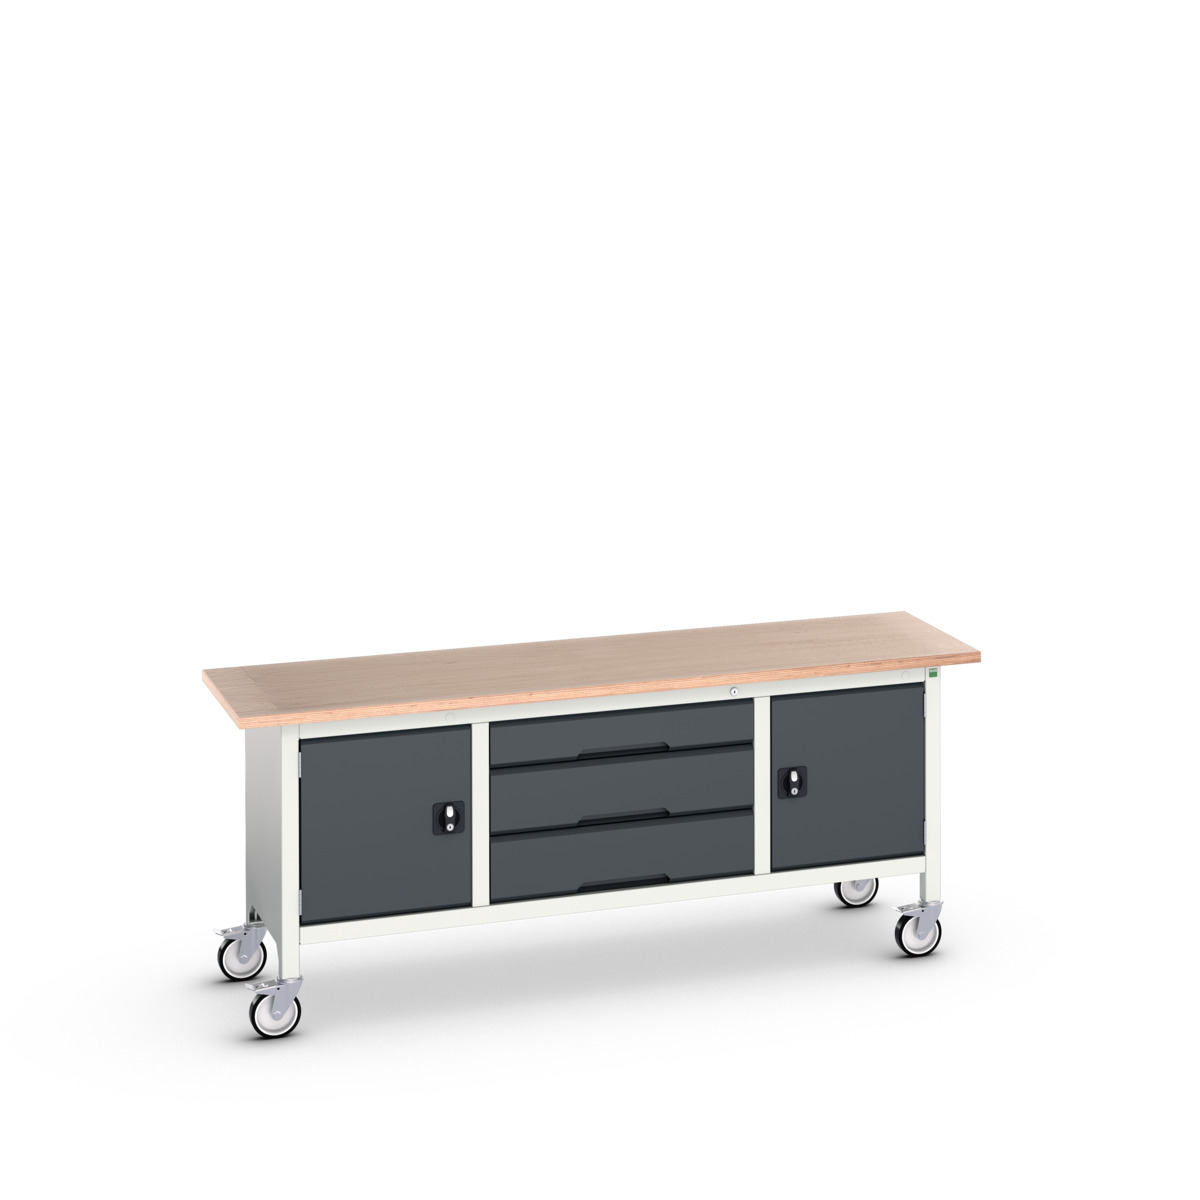 16923232.19 - verso mobile storage bench (mpx)